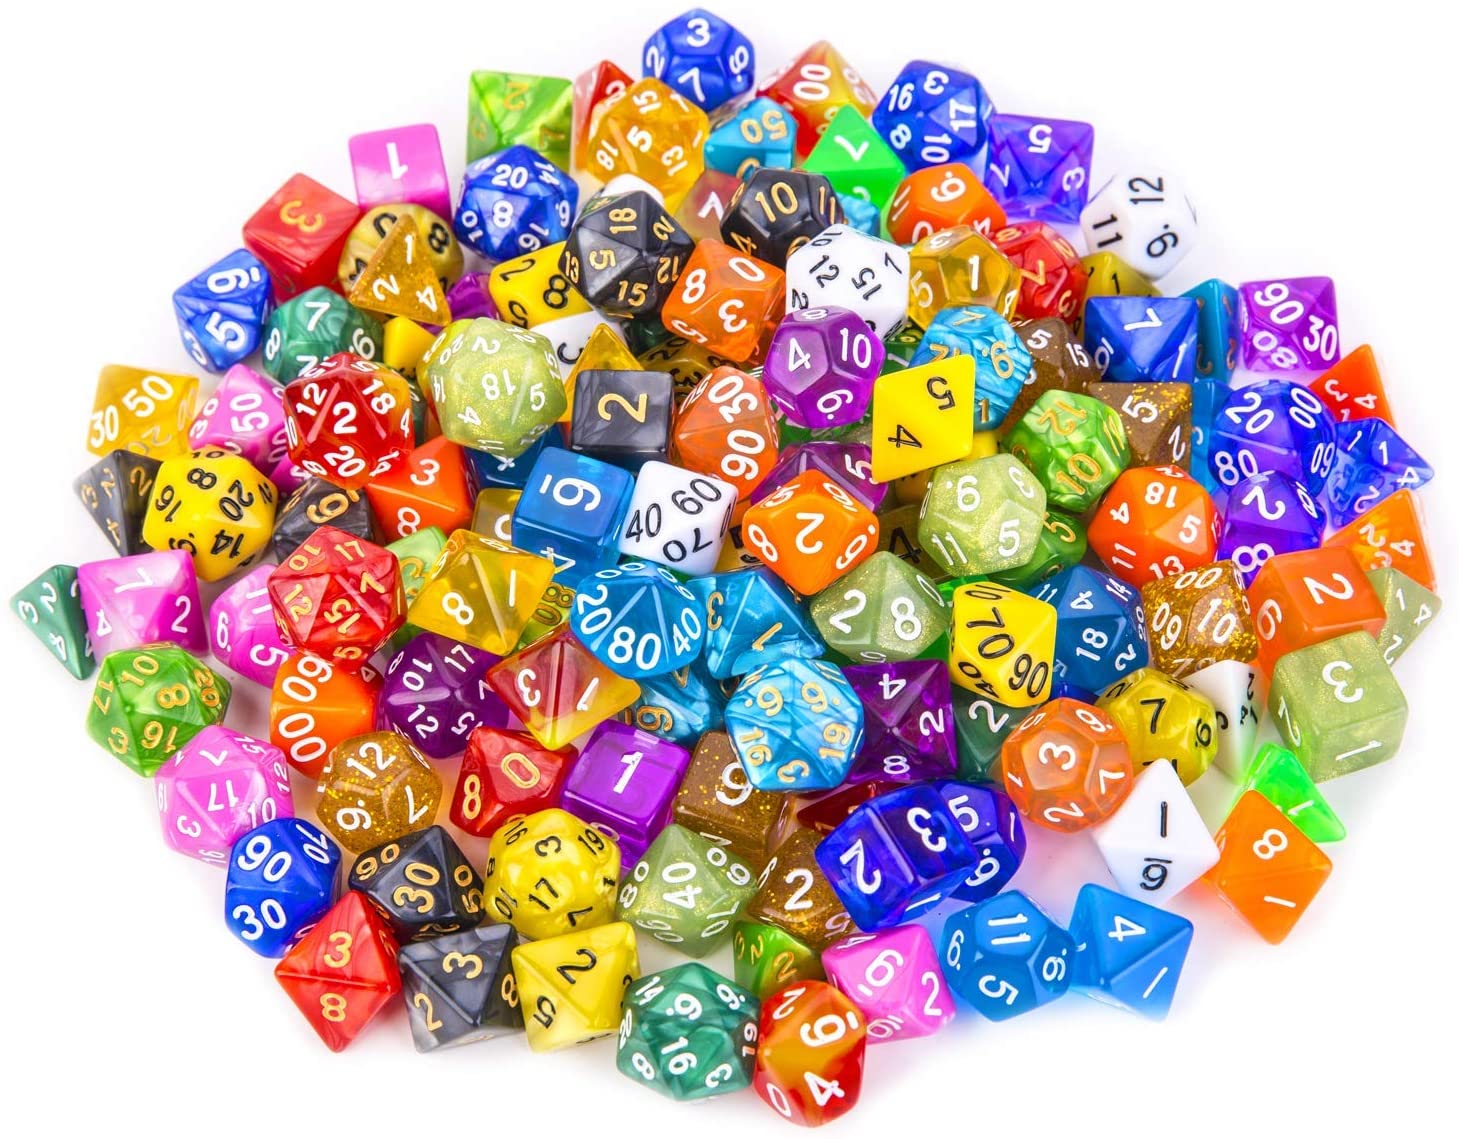 D4 D8 D10 D12 D20 20 Color DND Dice Role Playing Dice for Dungeon and Dragons DND RPG MTG Table Games Dice QMAY 140PCS Polyhedral Dice 